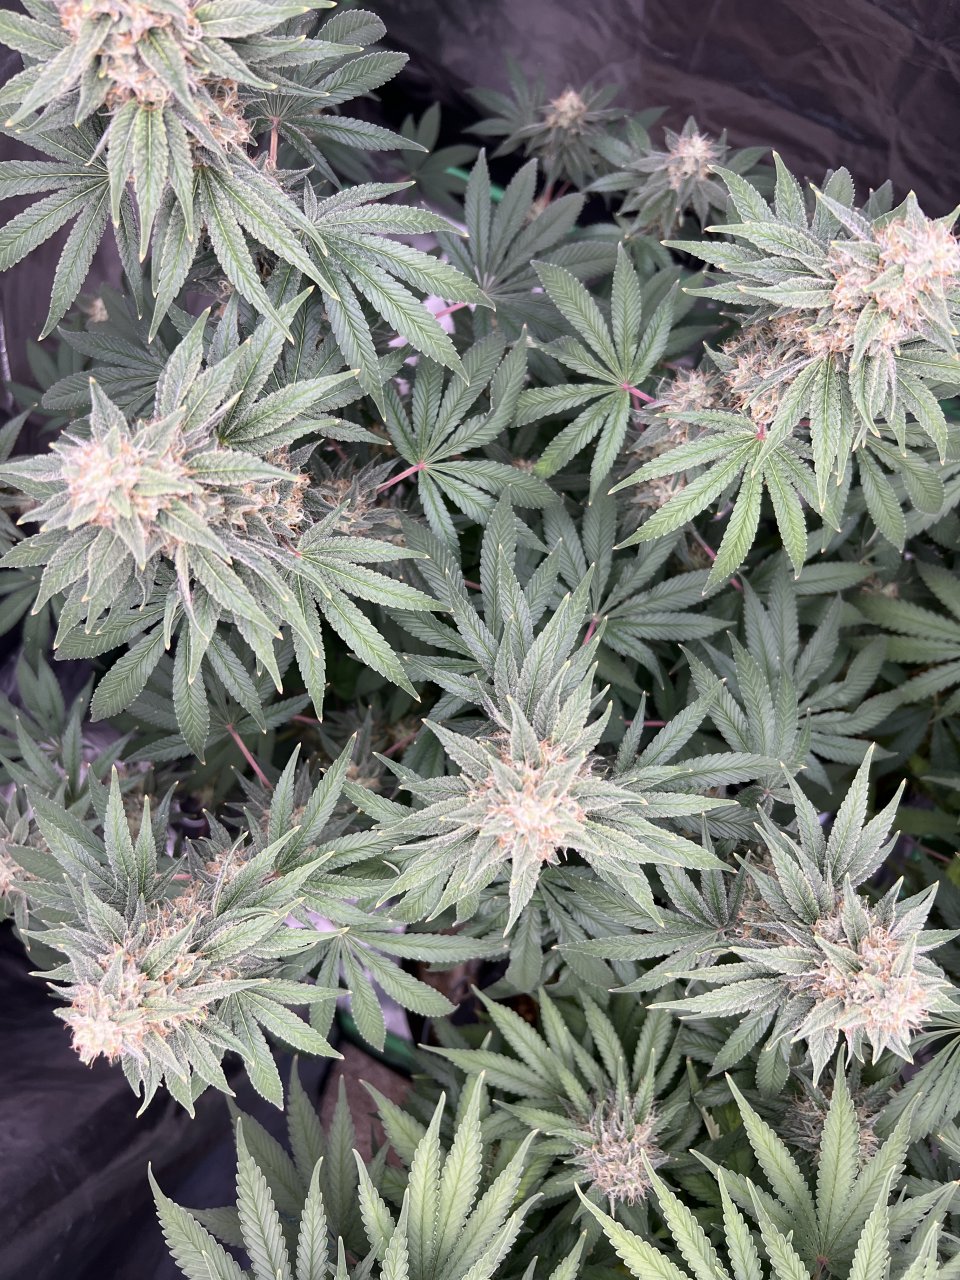 Banner Canopy Day 78 and day 40 of flower